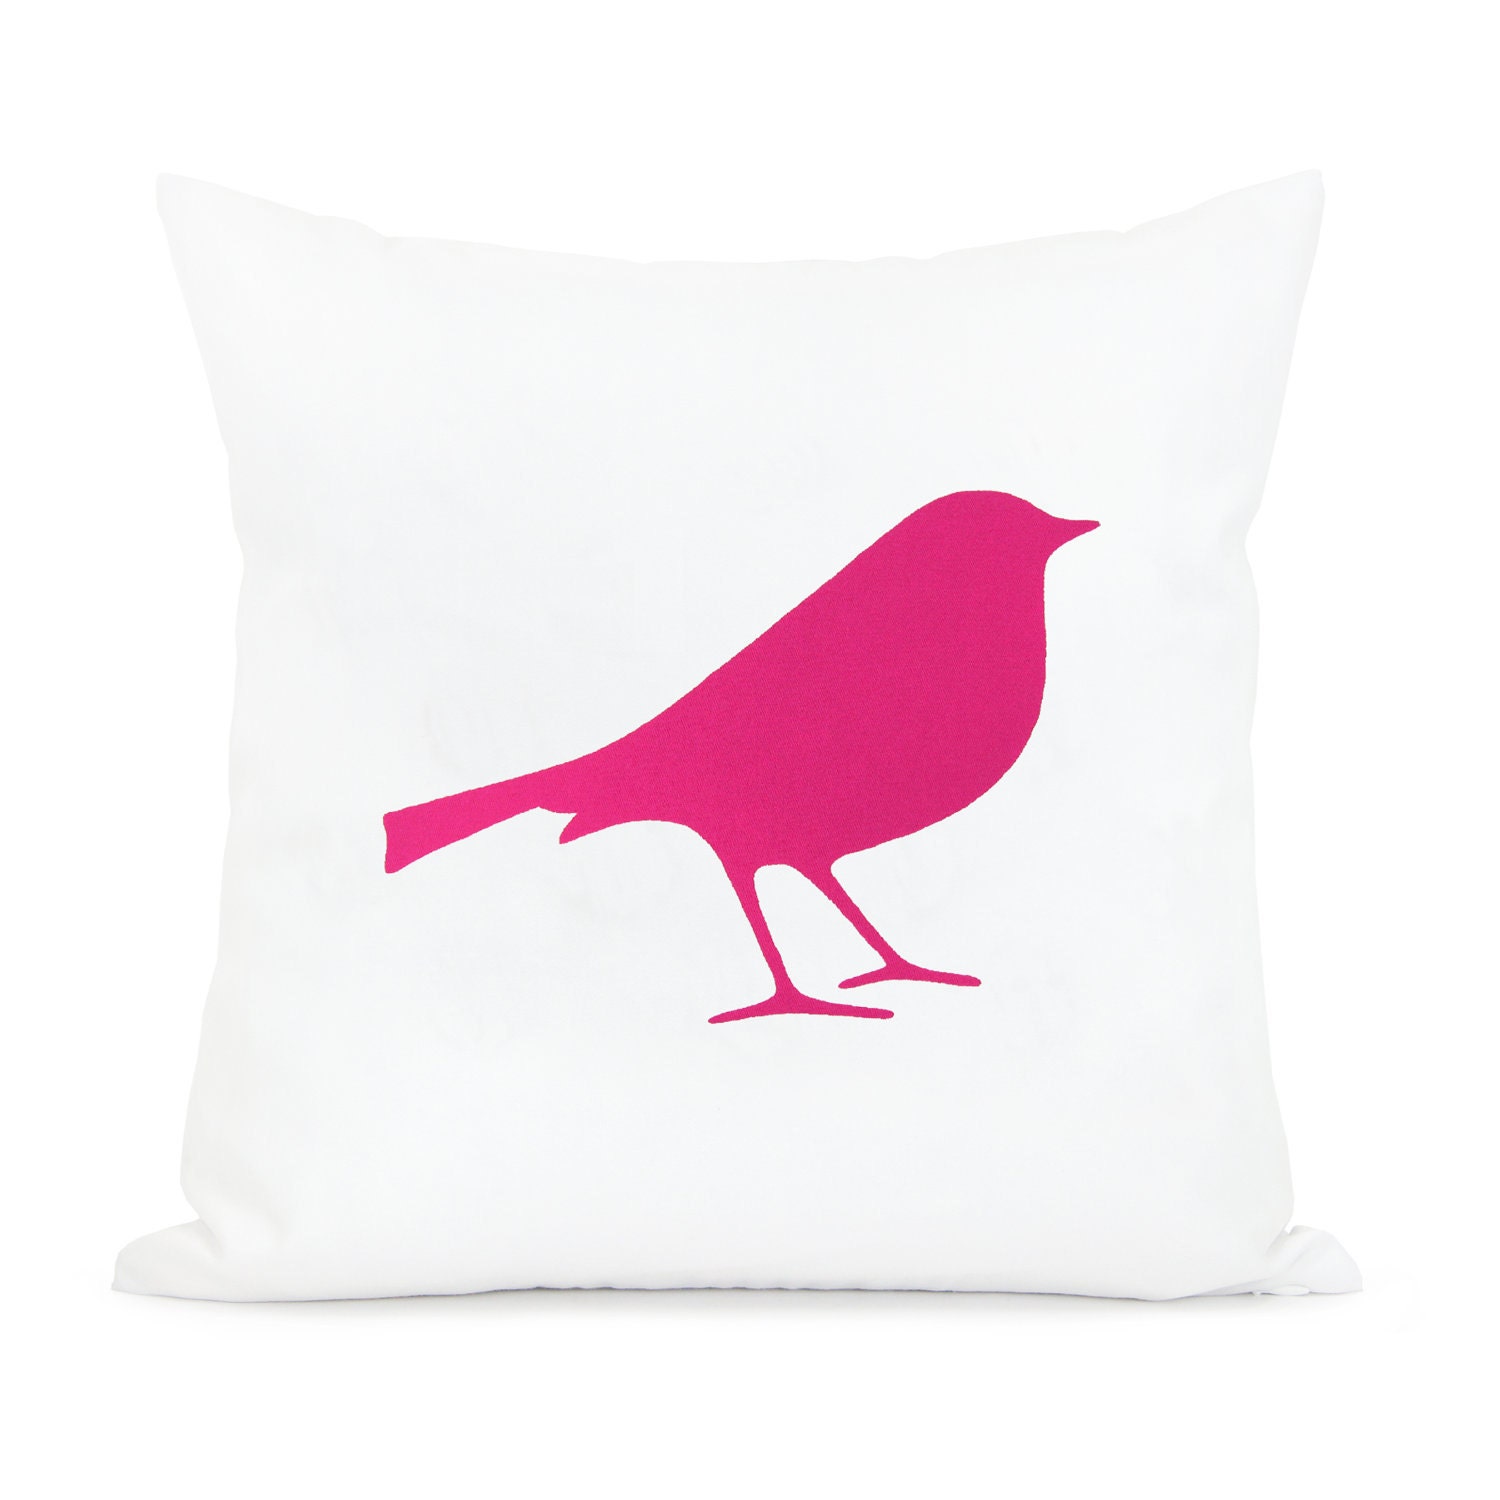 Pink and white pillow case - Hot pink bird print on white cotton canvas throw pillow cover - 16x16 decorative pillow cover - ClassicByNature